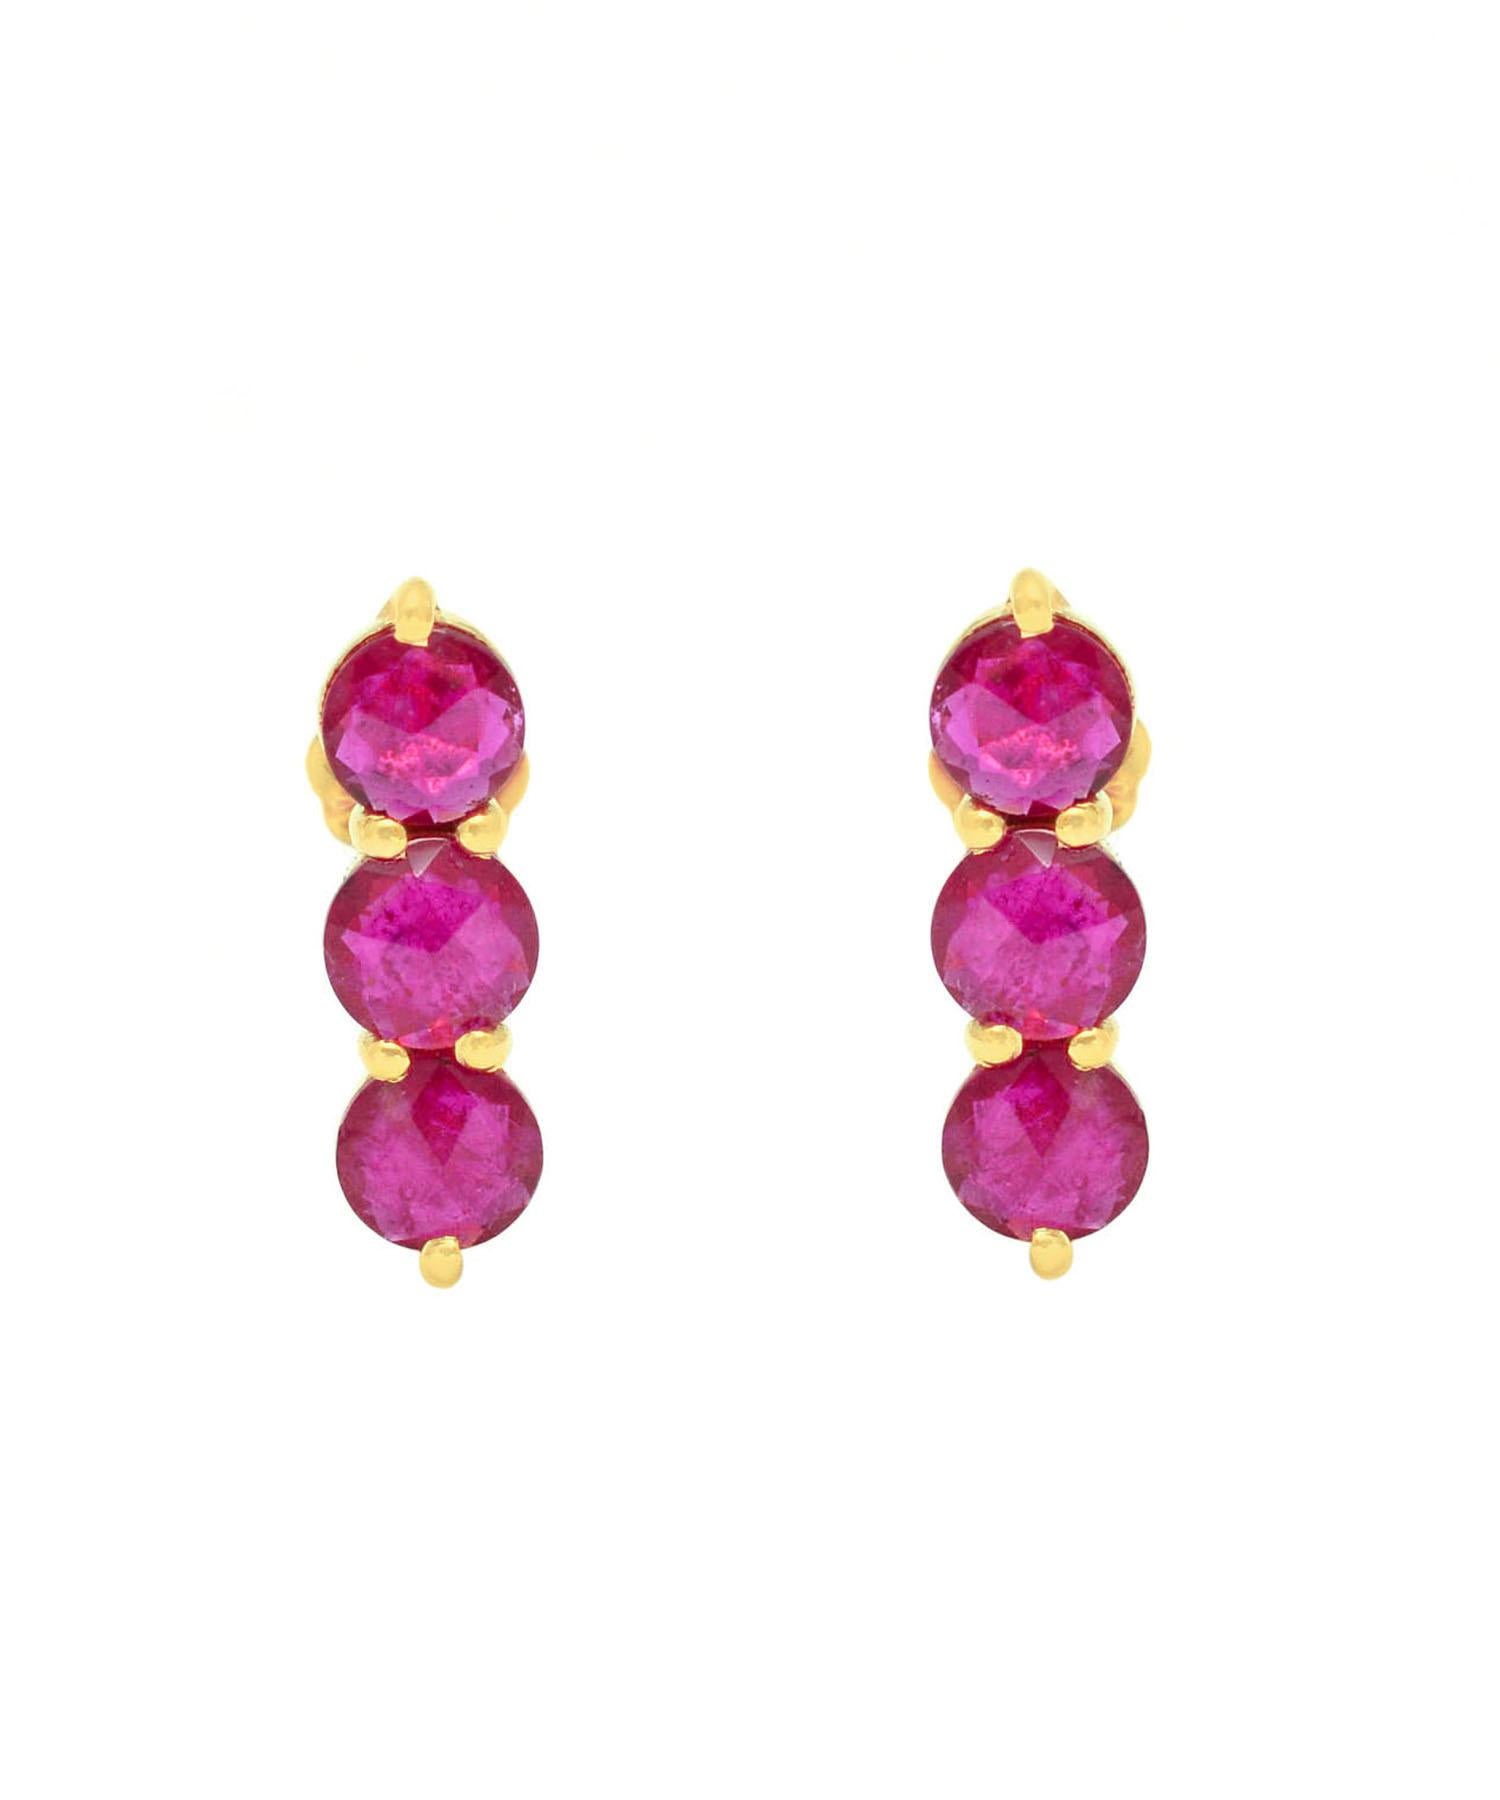 Brilliant Cut Ruby Stud Earrings with 14k Gold For Sale